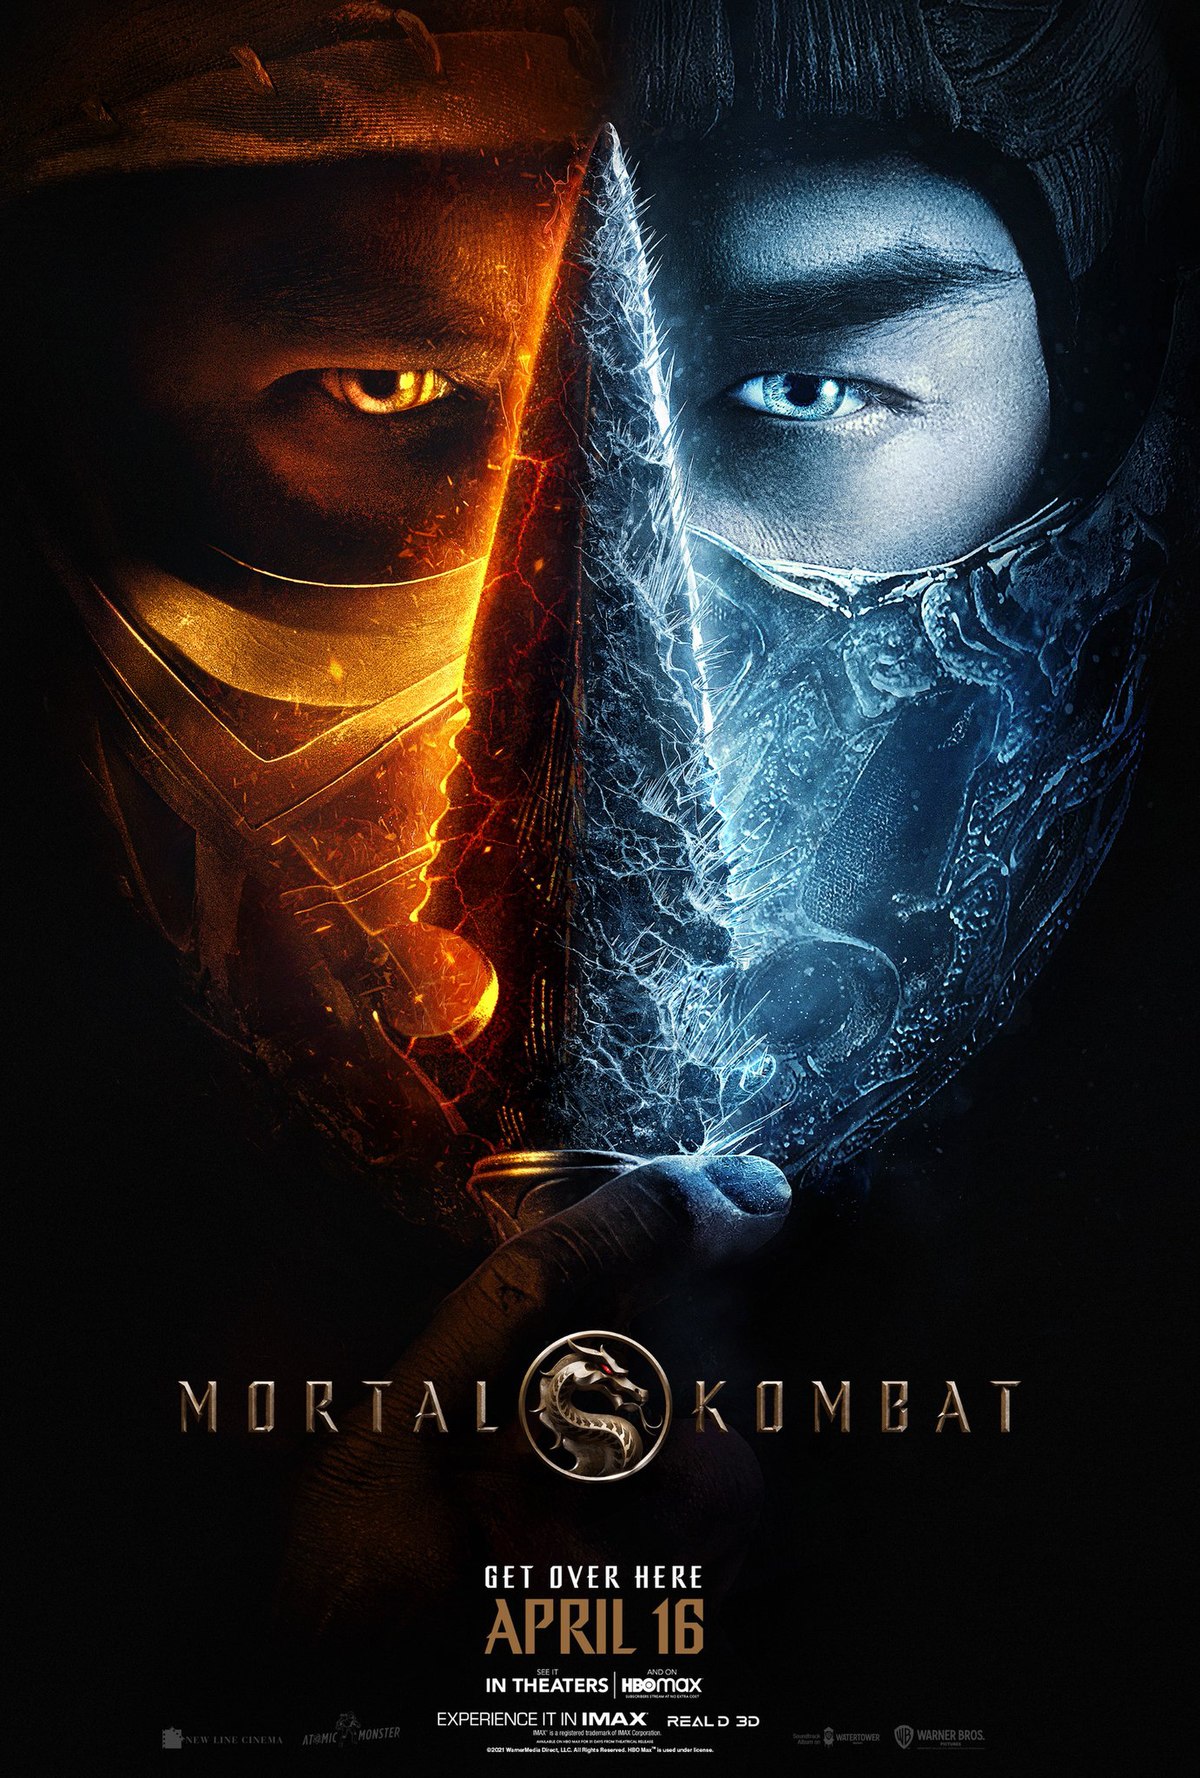 You are currently viewing First Mortal Kombat Trailer For Upcoming Movie Released